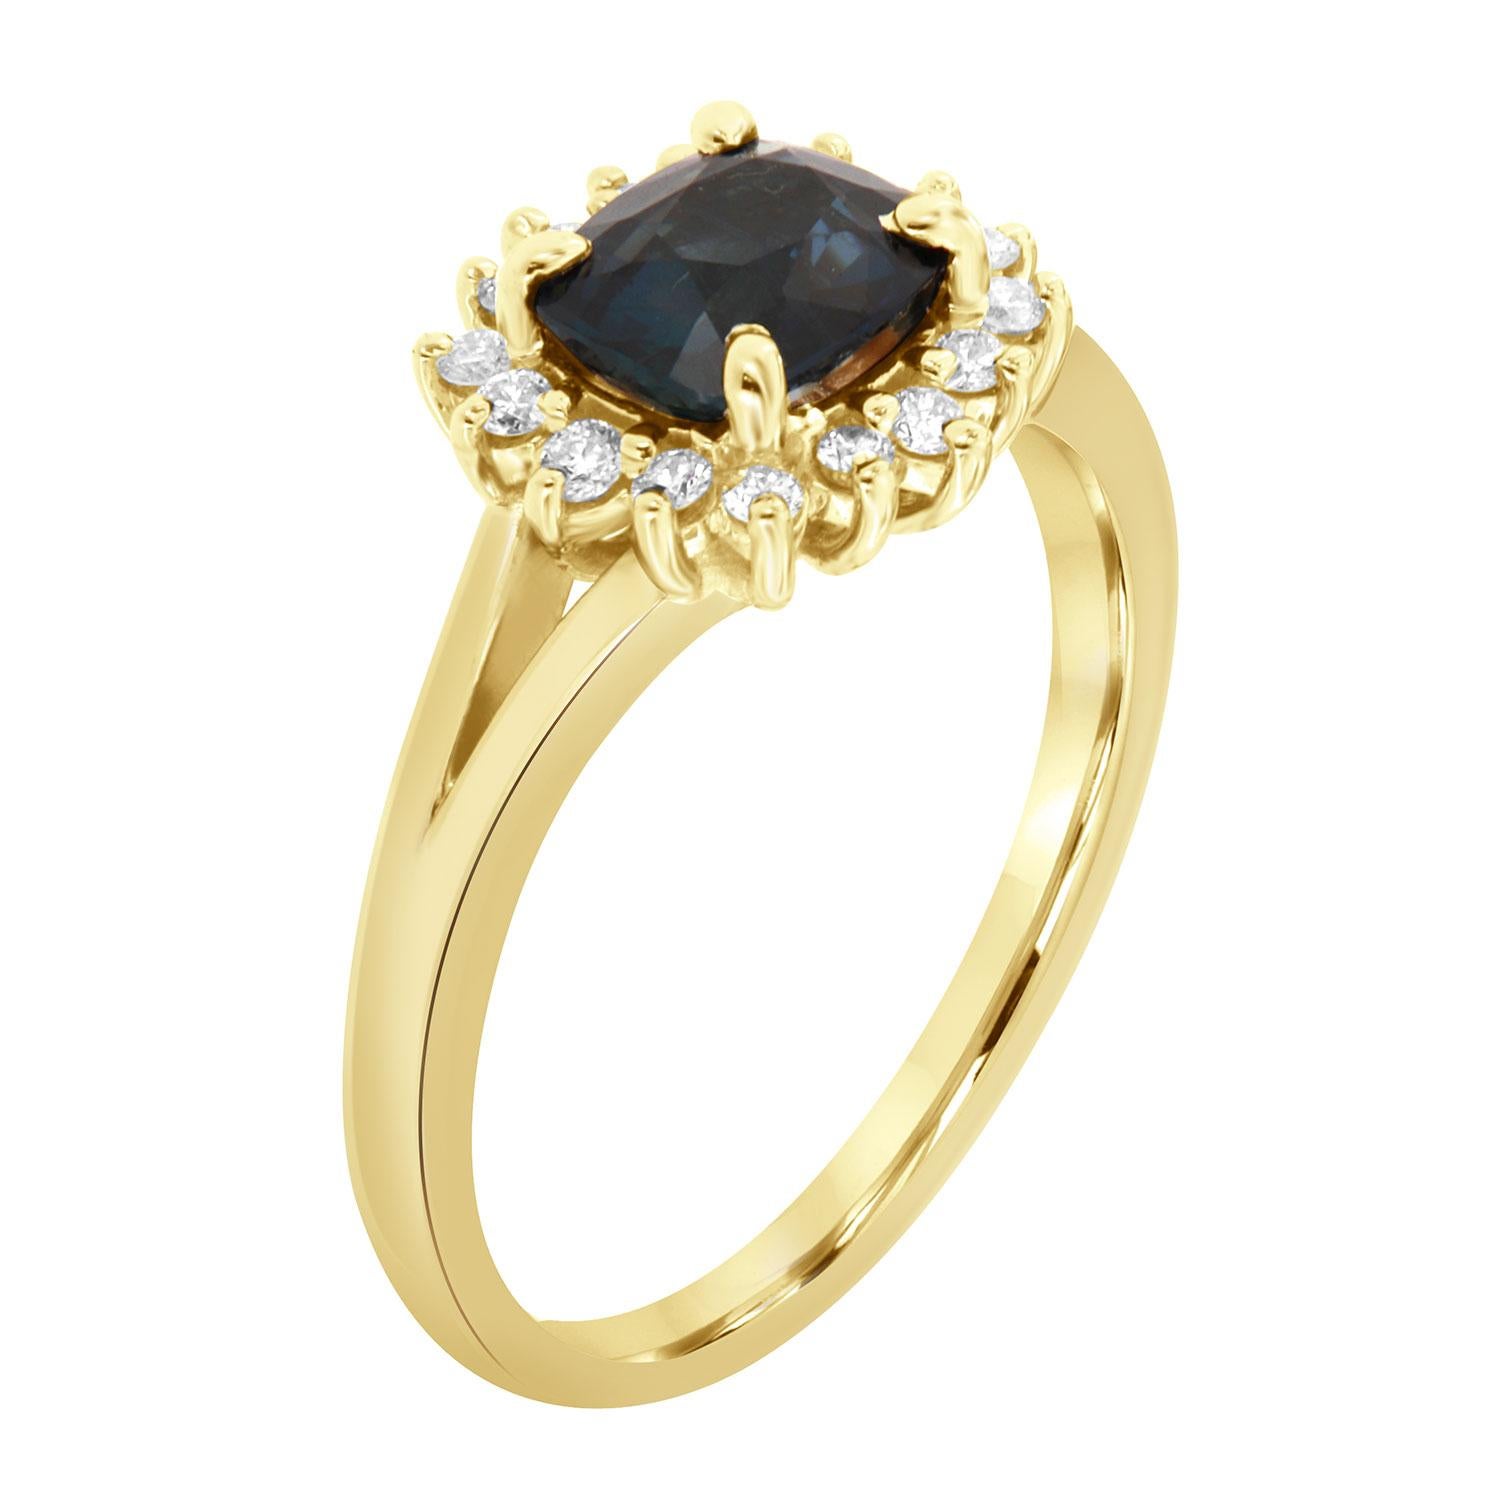 This 14k yellow gold ring features a beautiful 1.57 Carat Elongated Cushion- Shaped vibrant Blue Sapphire set East-West style and encircled by a halo of fourteen (14) Brilliant round diamonds in total weight 0.20 Carat.  
The band is a 2 mm wide